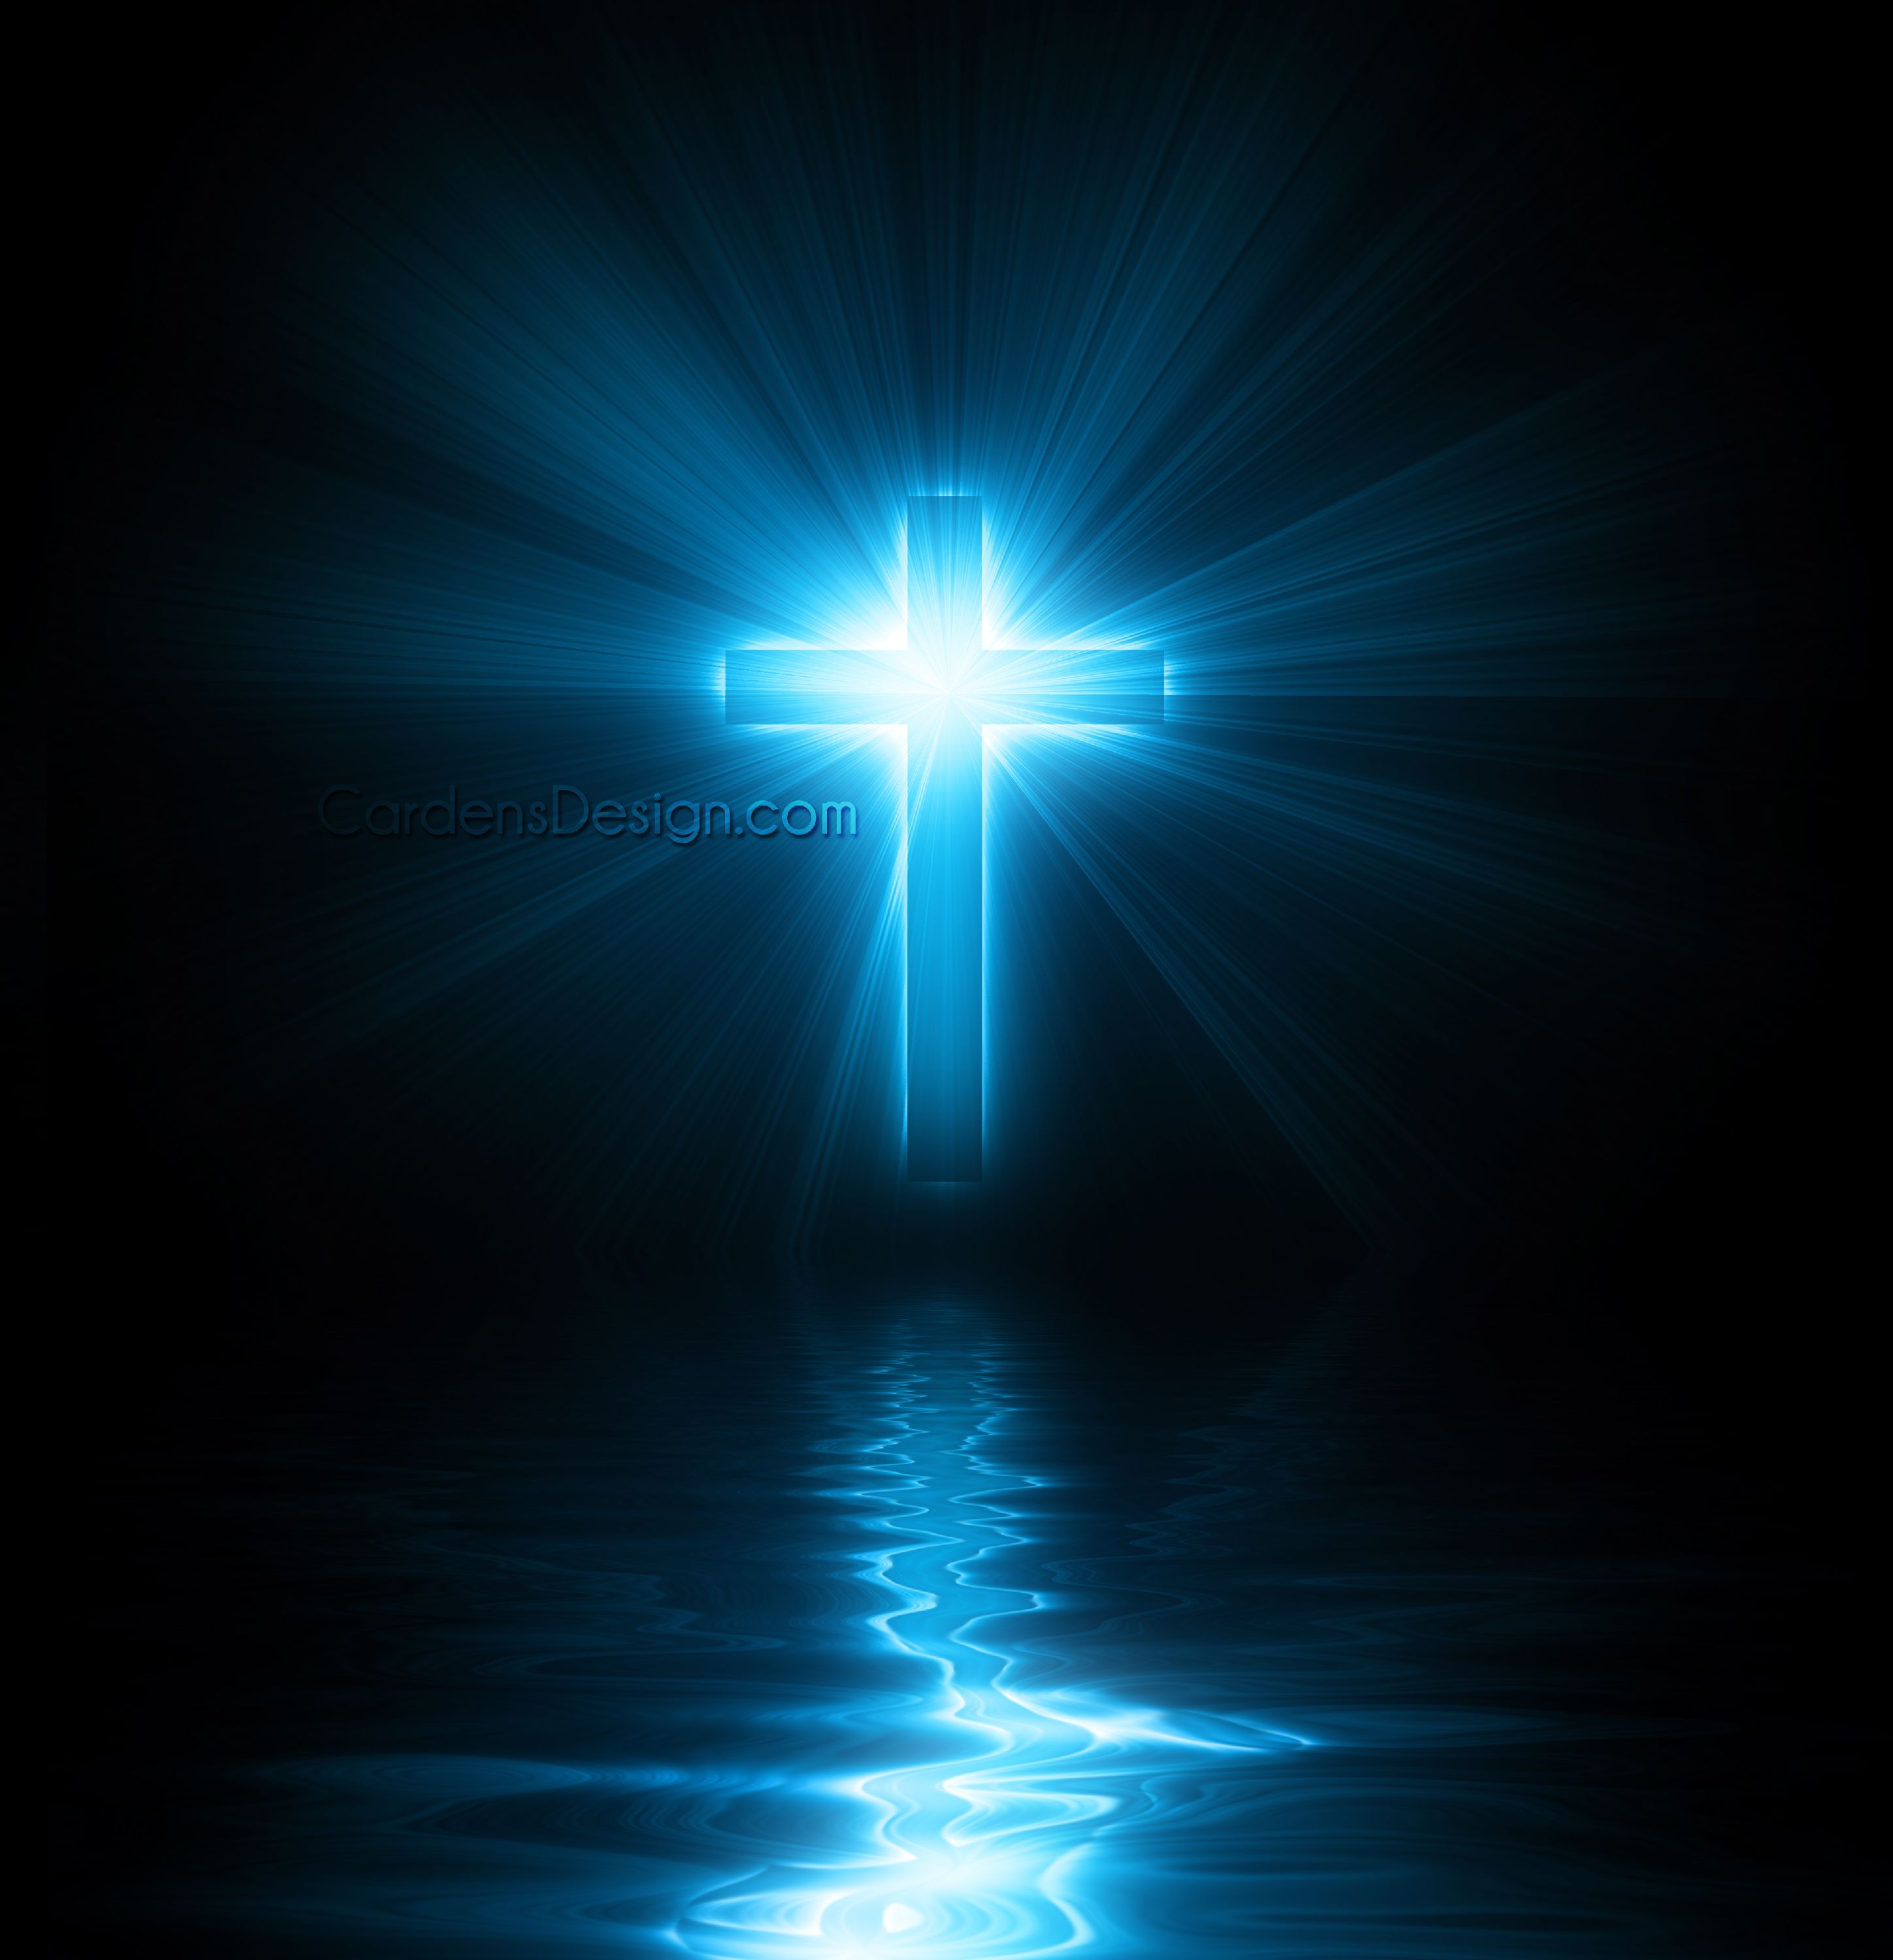 Cross Images With Backgrounds - Wallpaper Cave